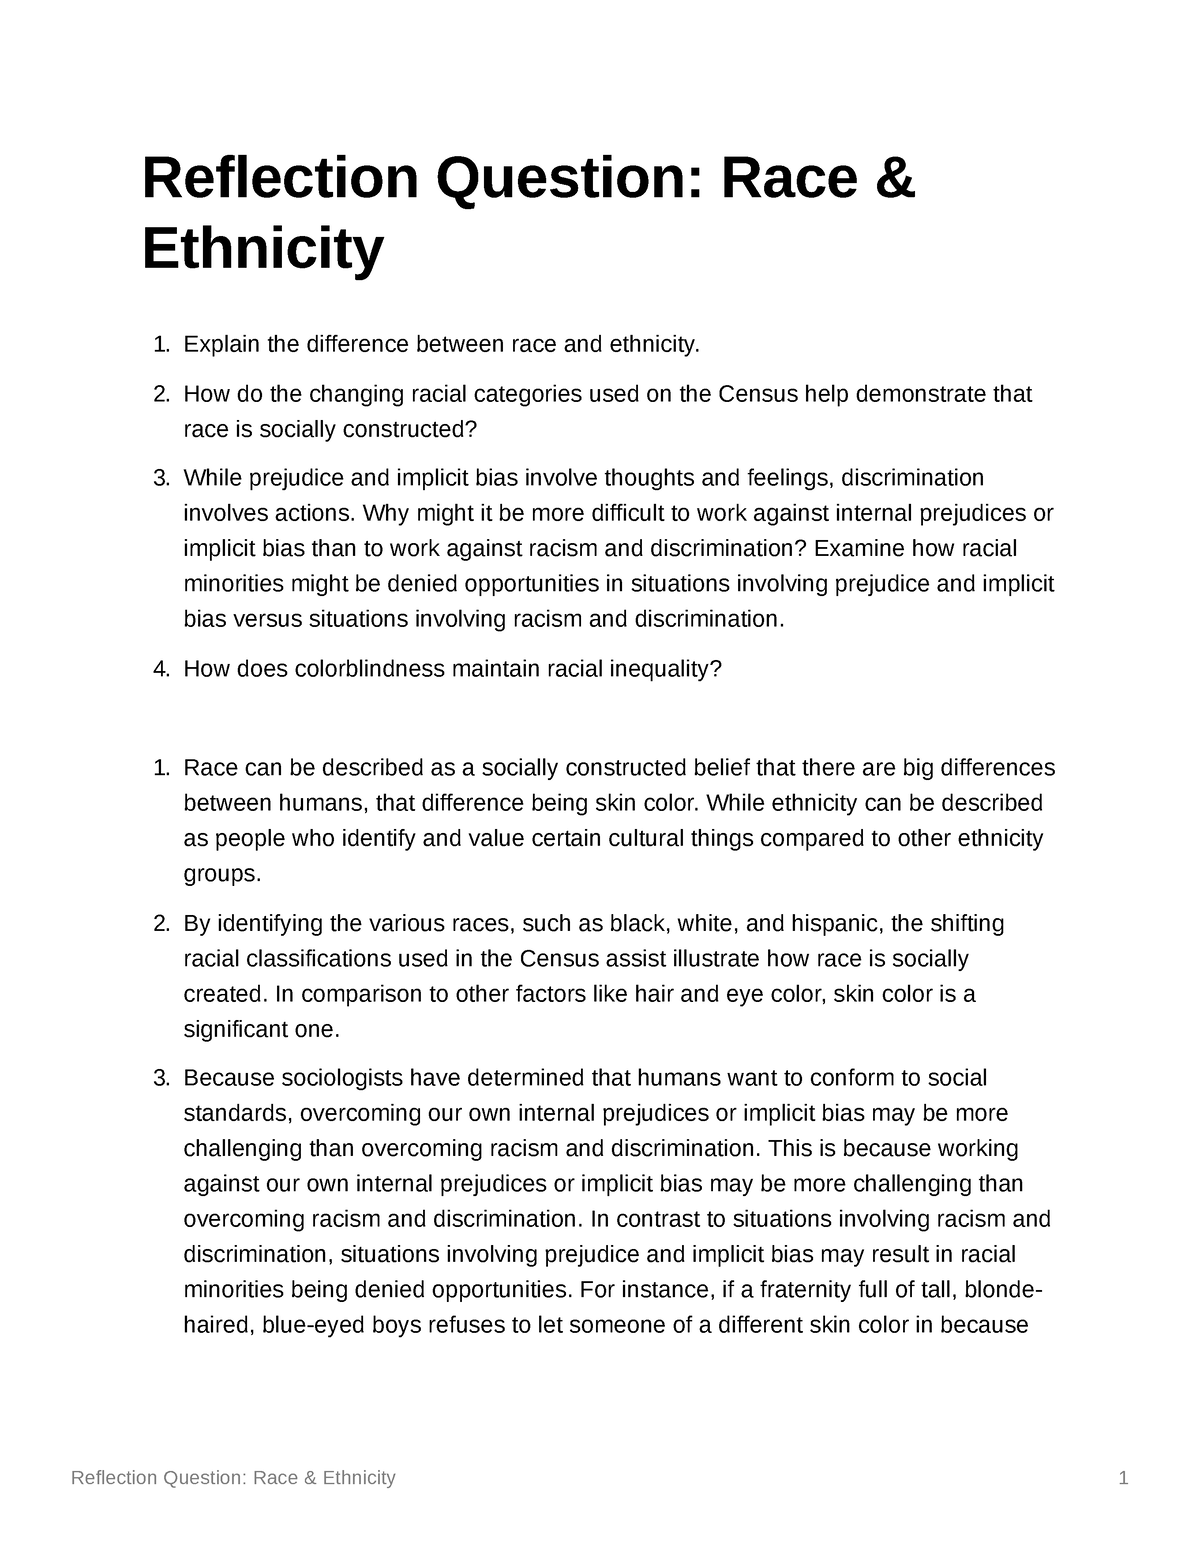 race and ethnicity reflection paper